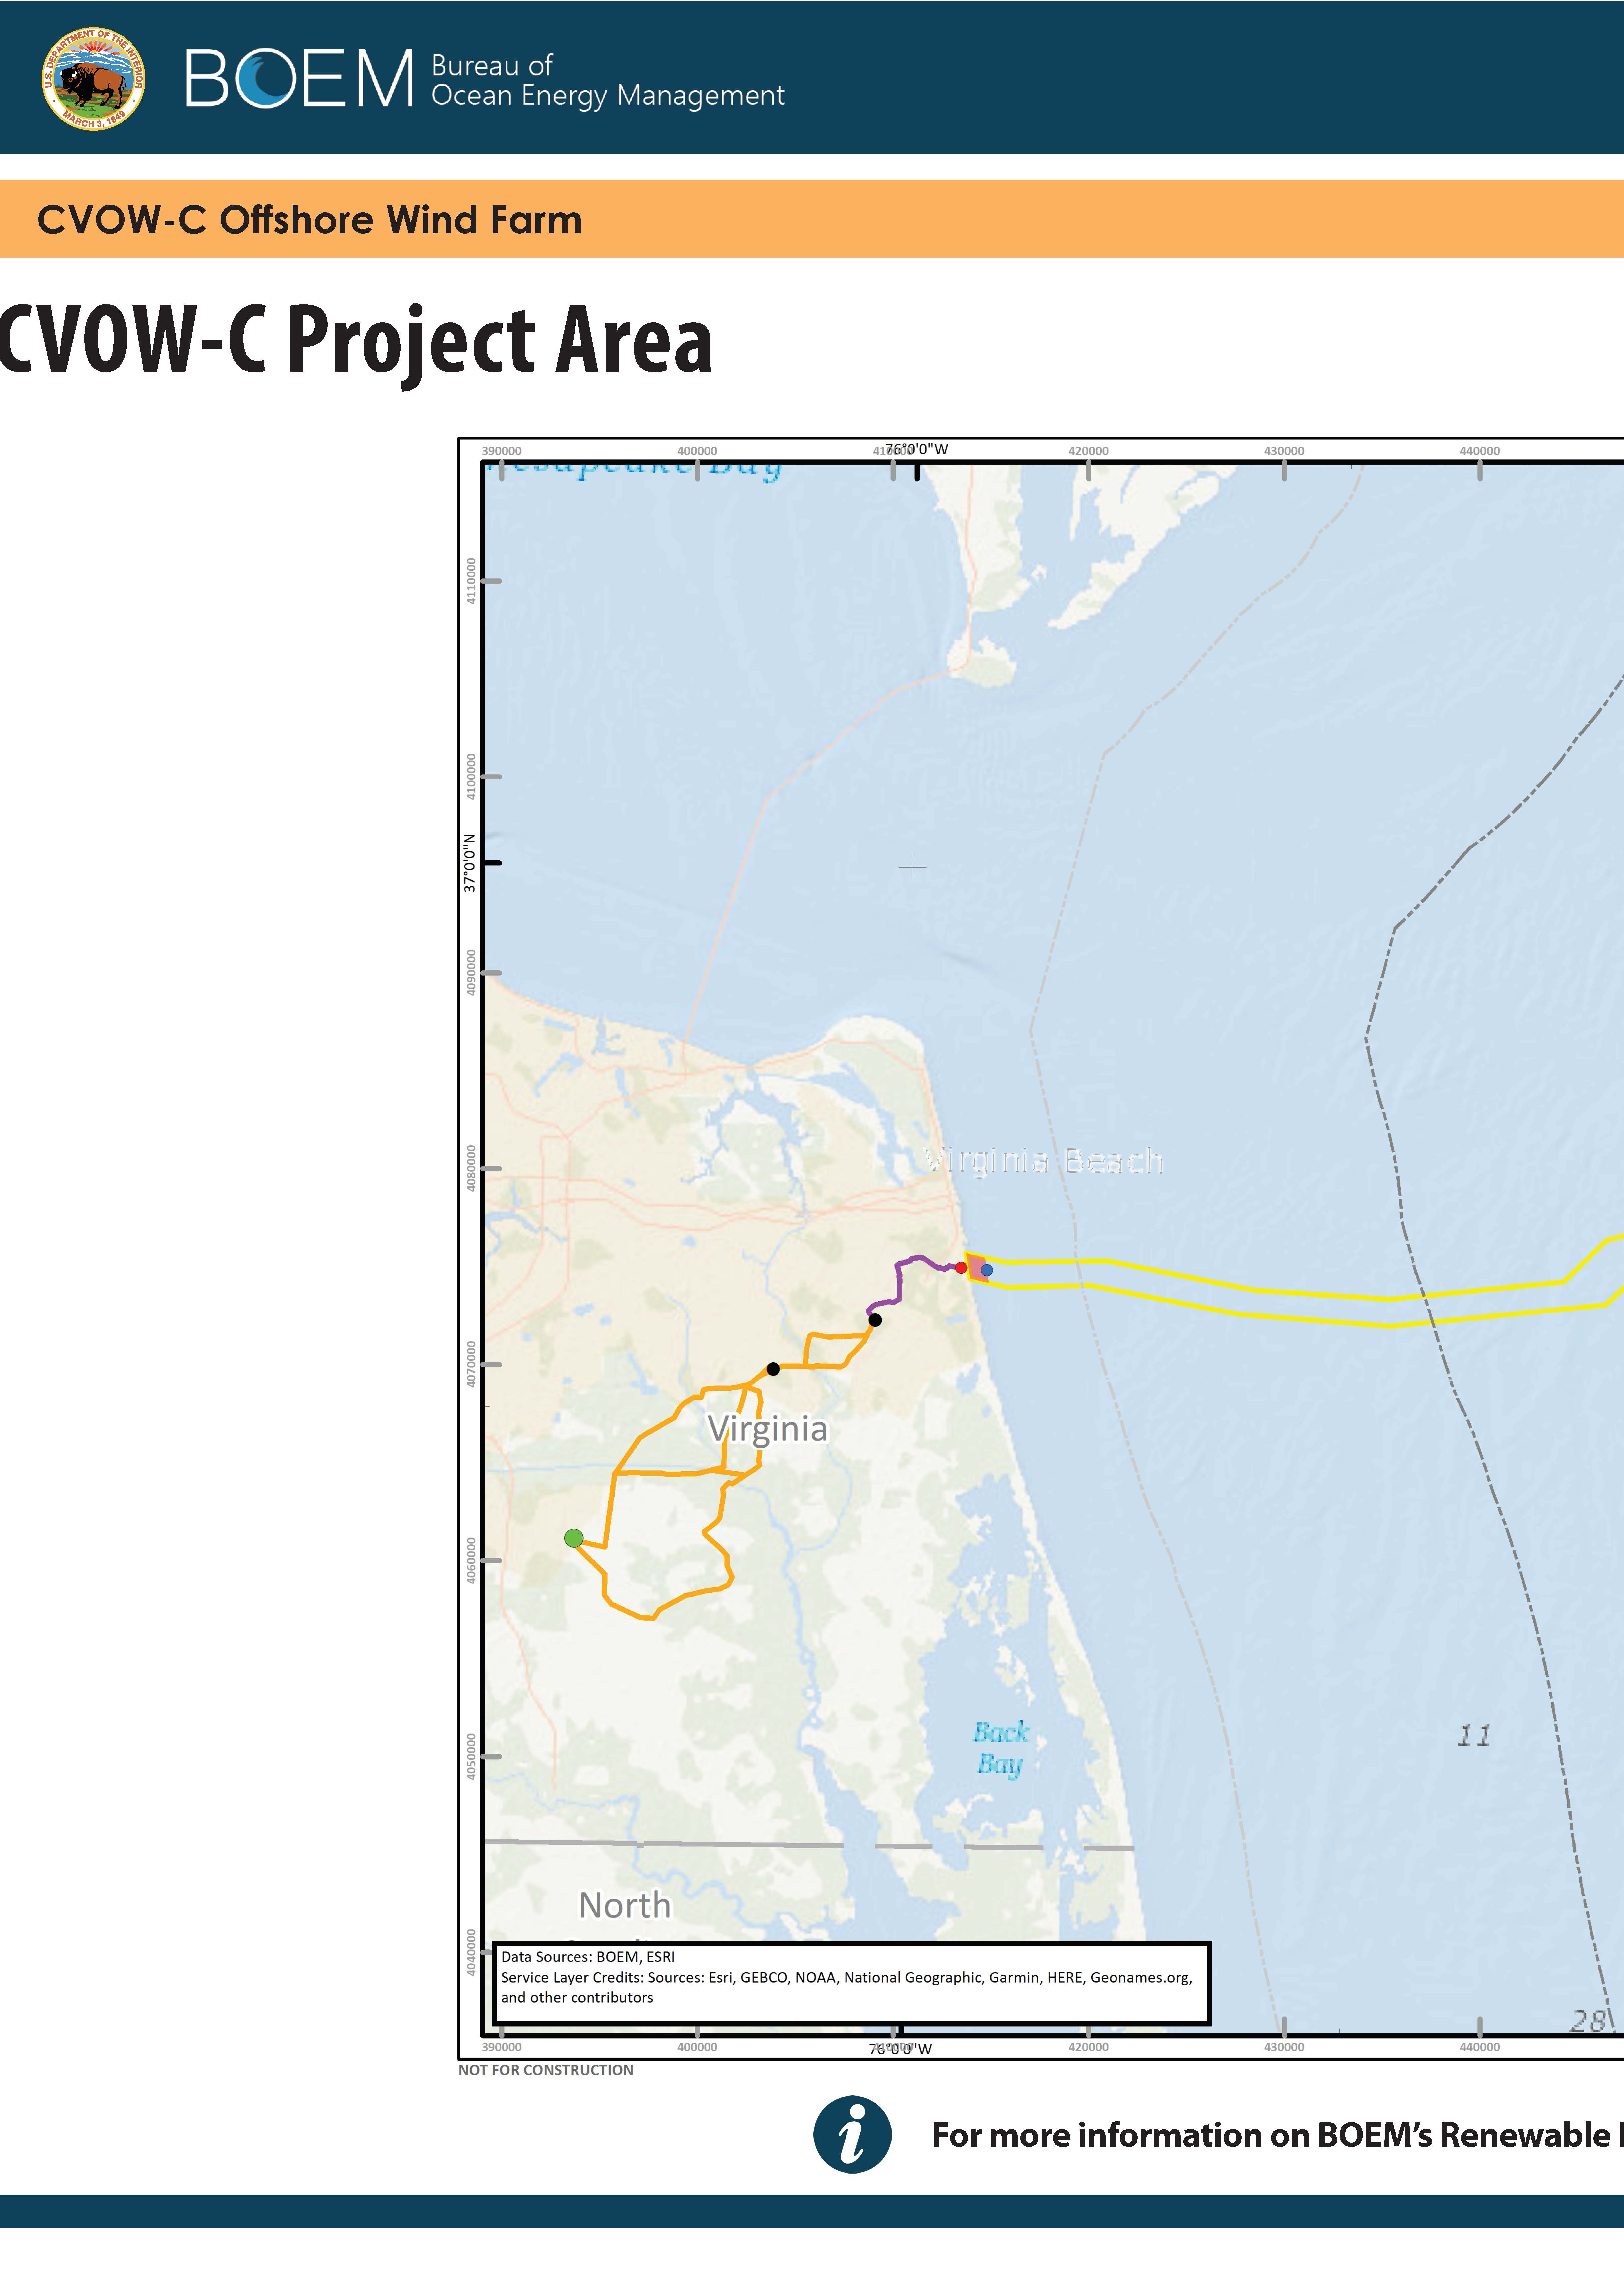 CVOW-C Project Area